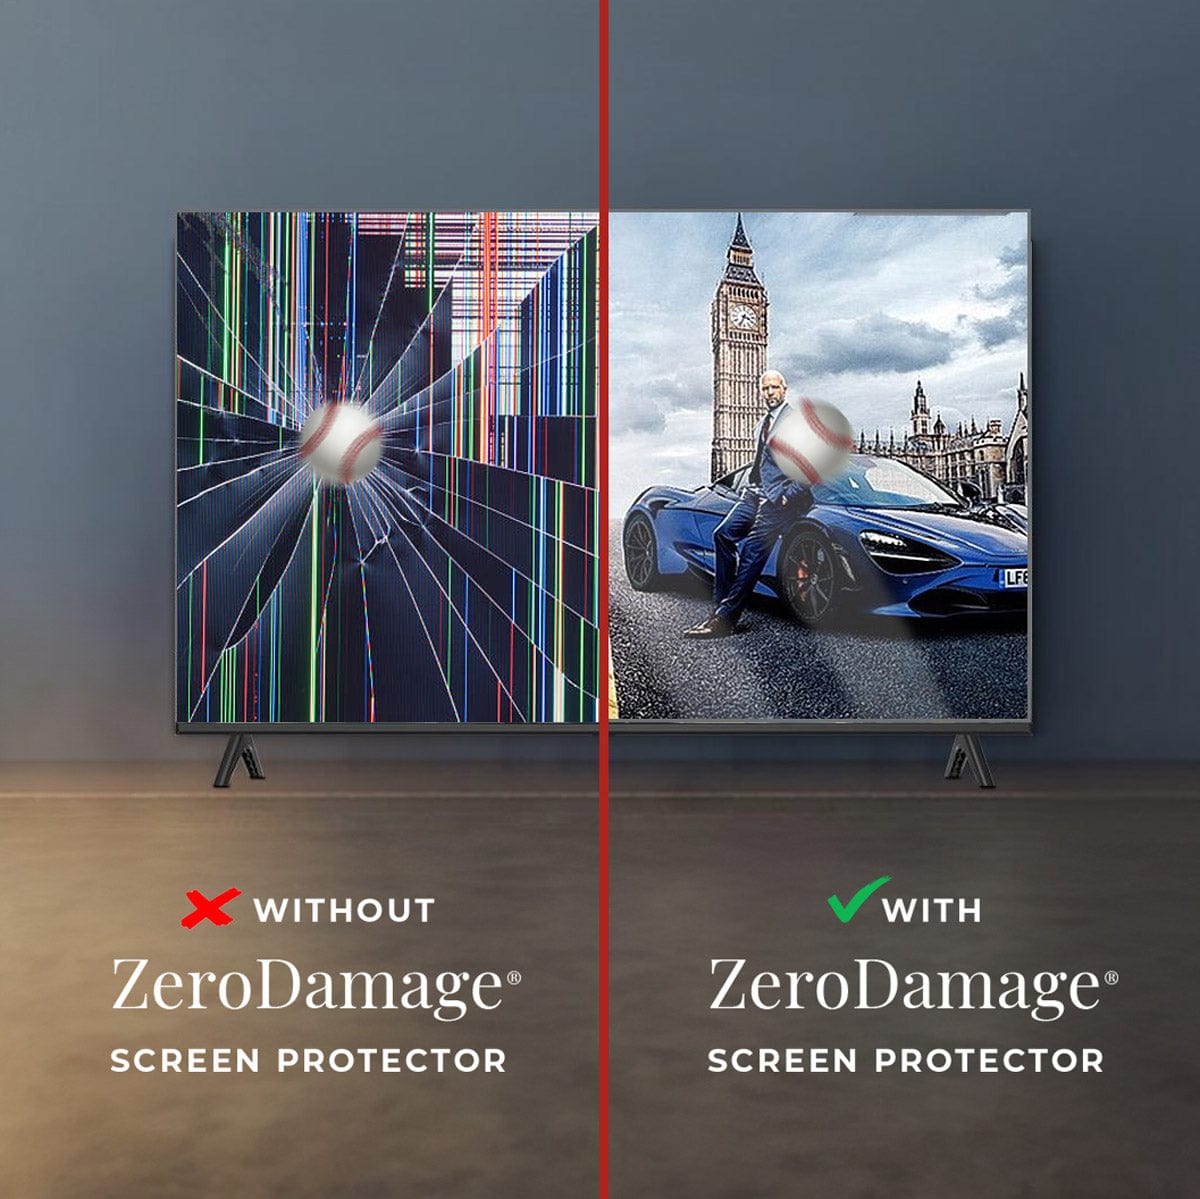 ZeroDamage Anti-Blue Light TV Screen Protector for Most 50" TVs - Clear